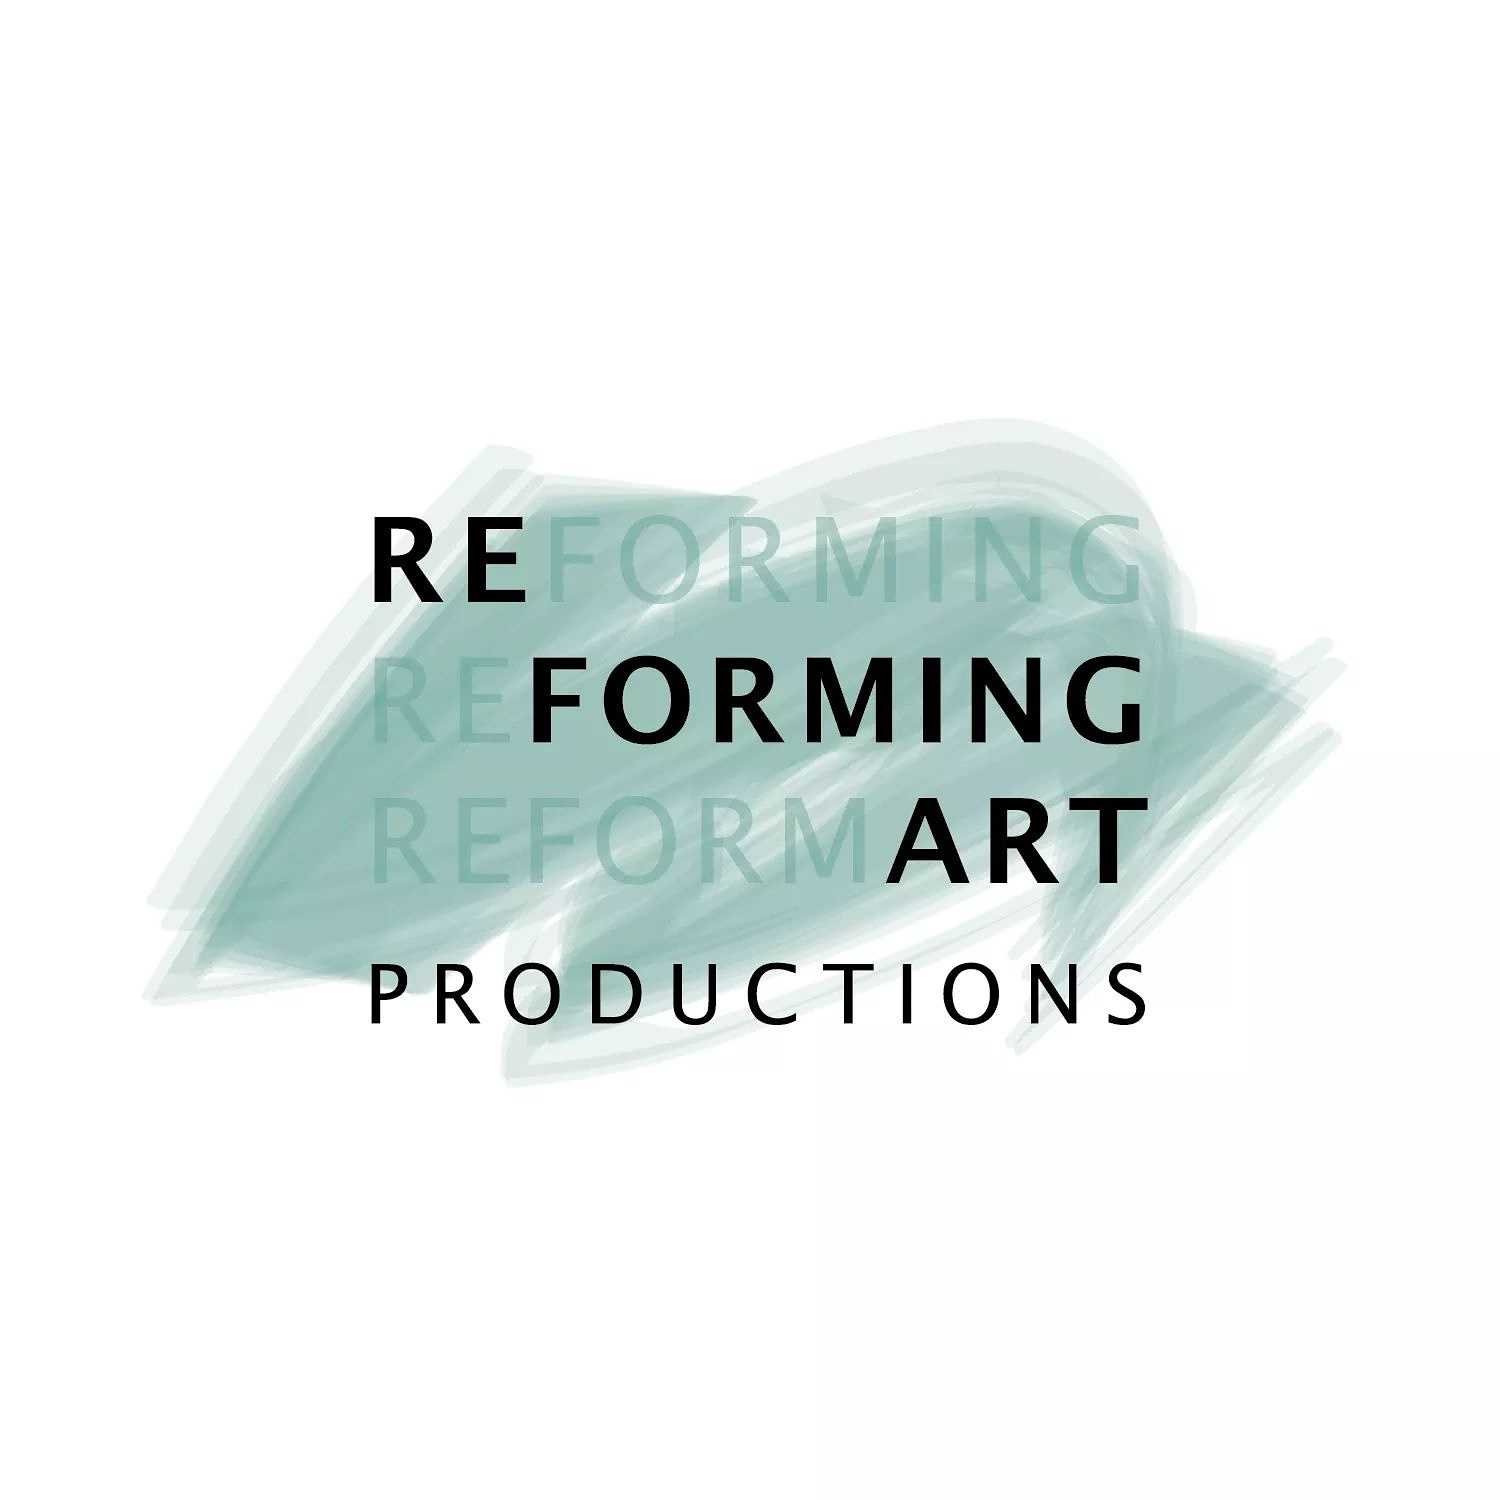 Reforming Art Productions